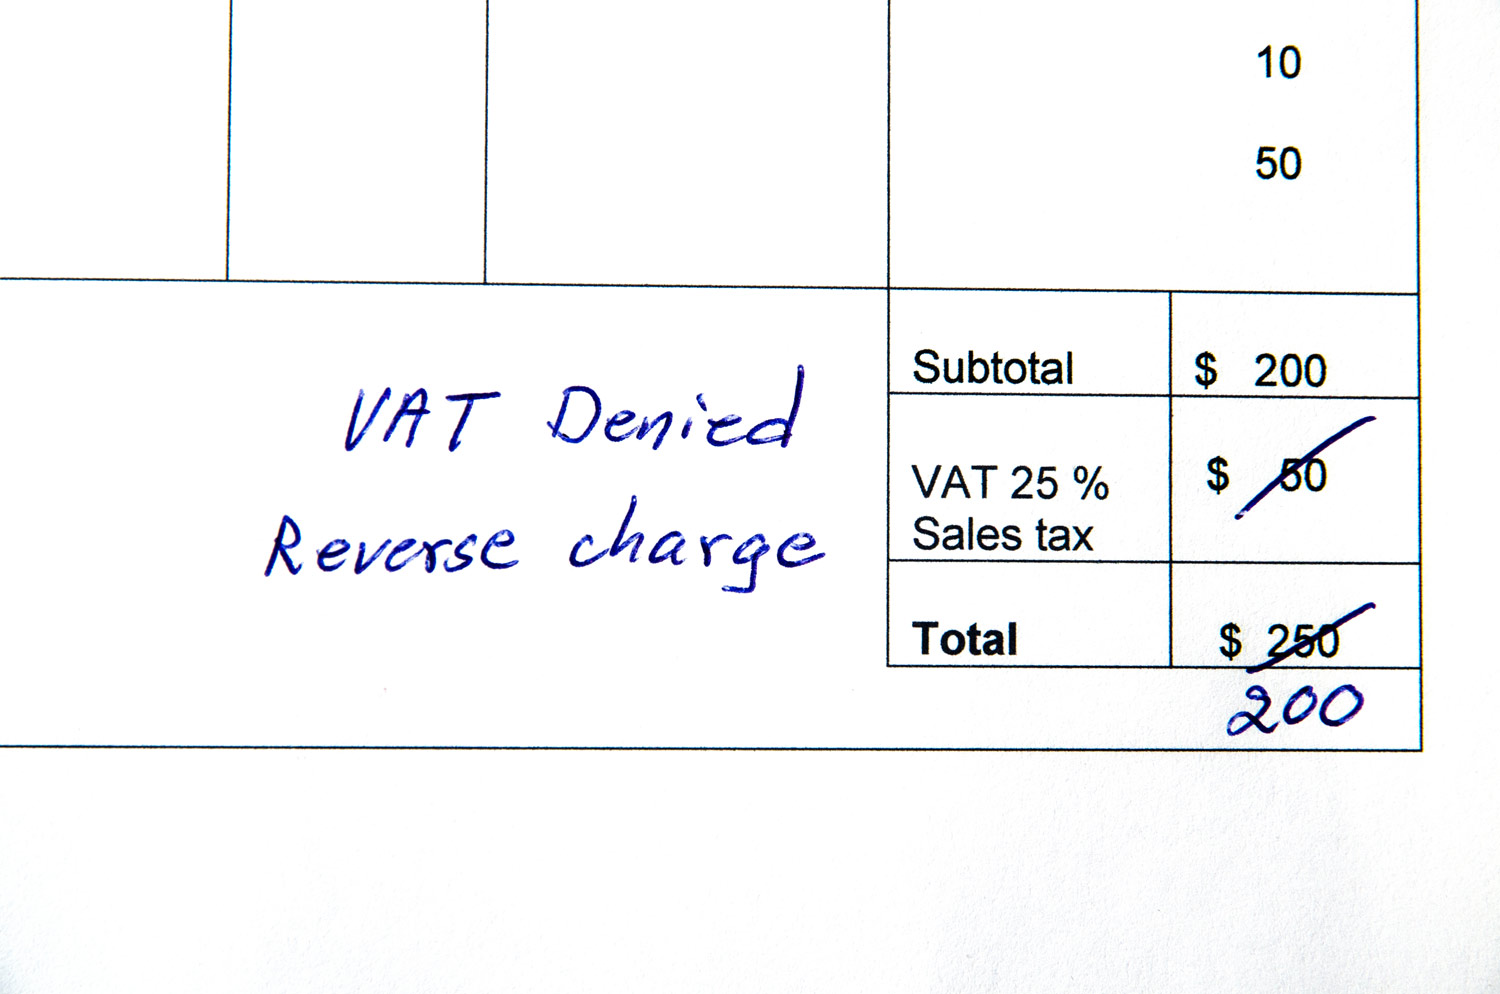 VAT REFUND-REVERSED CHARGE (OPERATING COSTS)